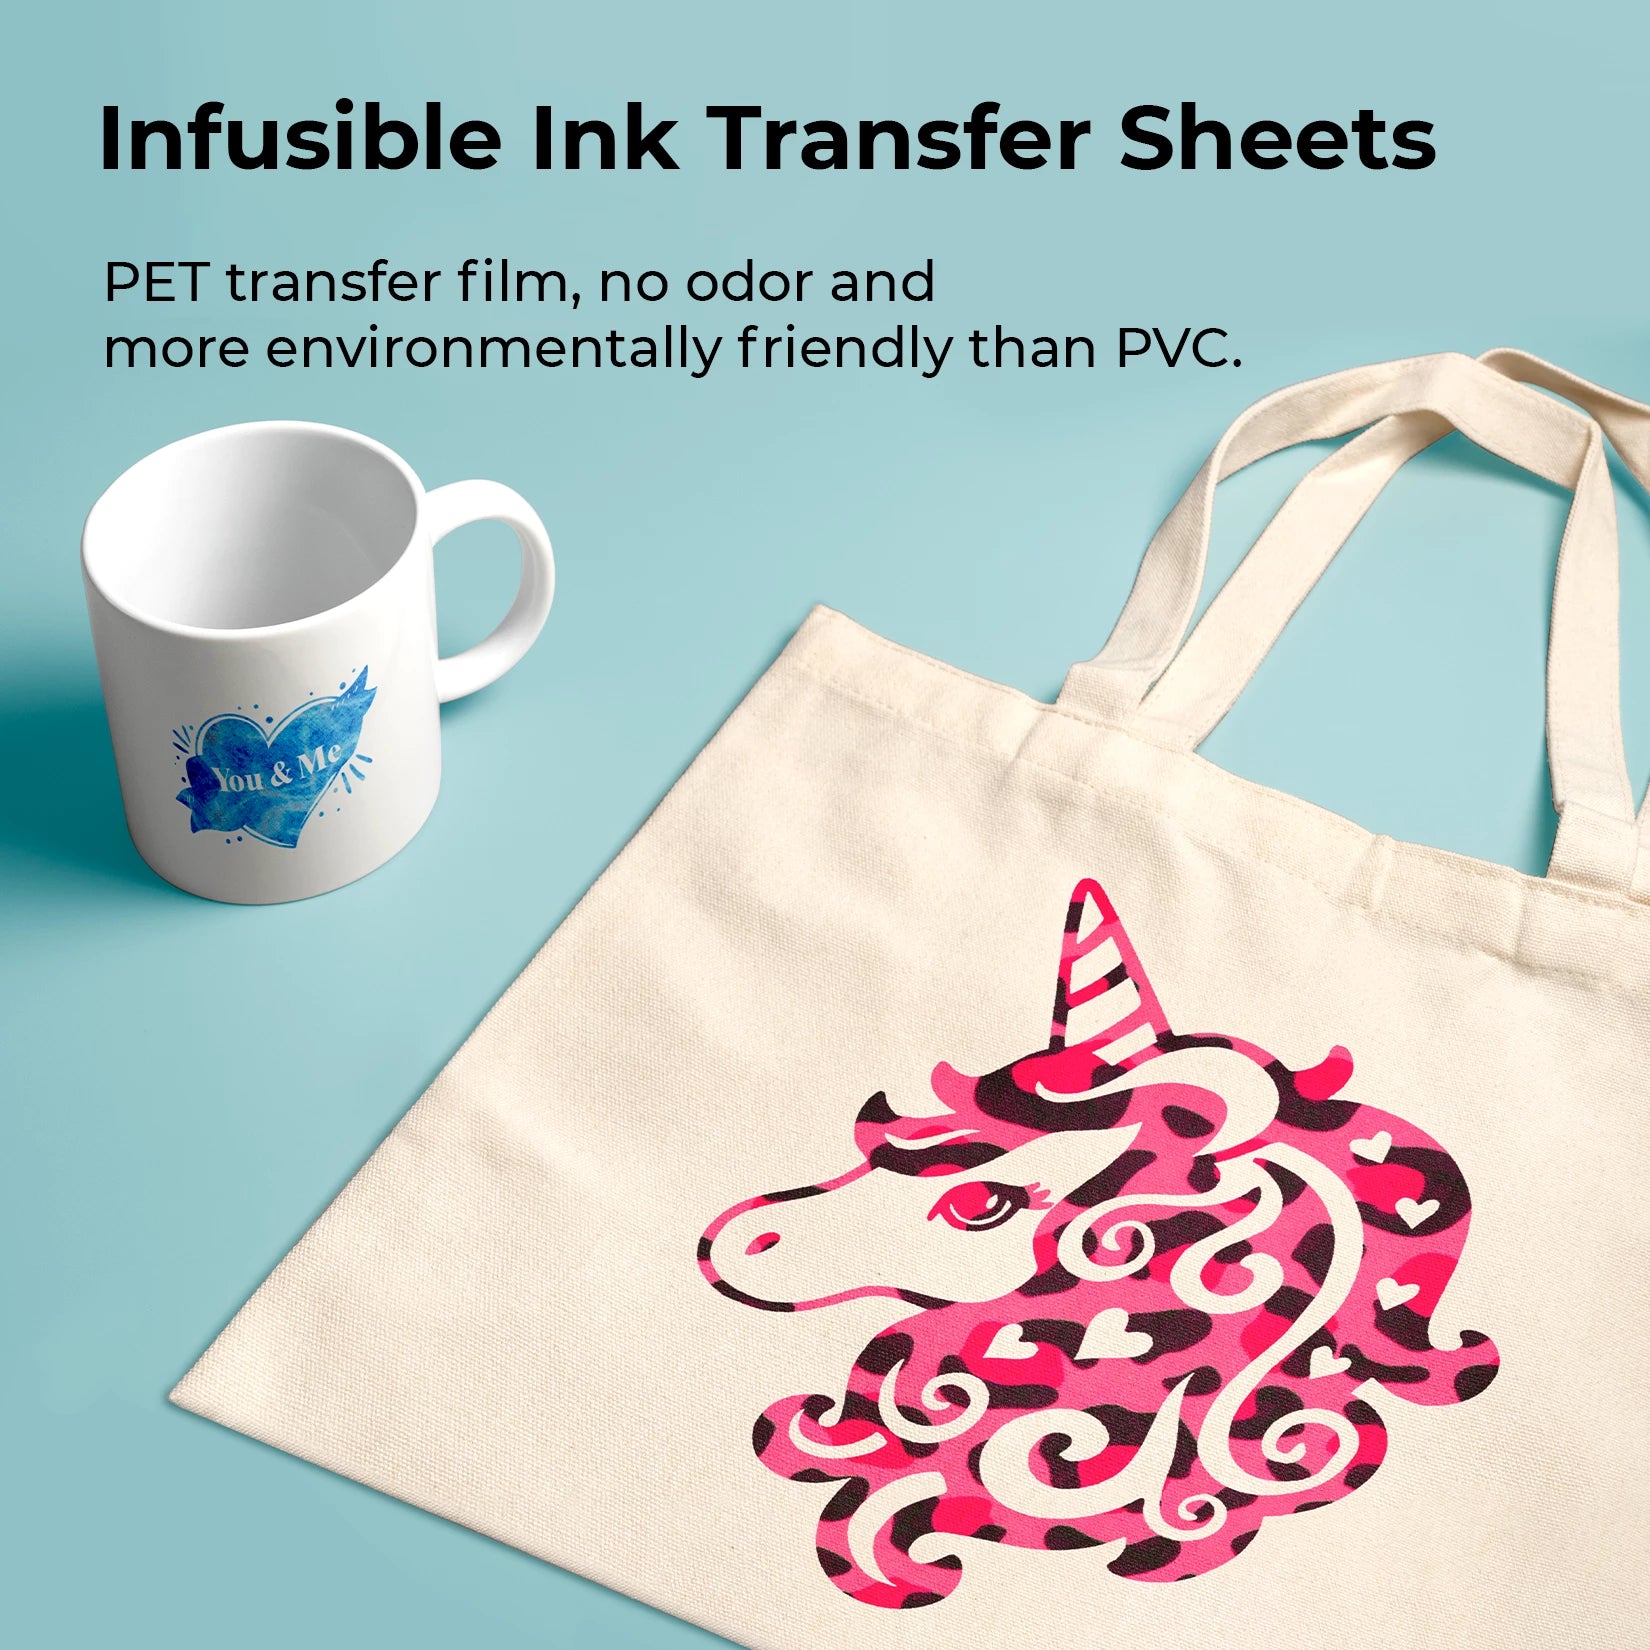 Textured Infusiable Ink Transfer Sheets (14pcs)